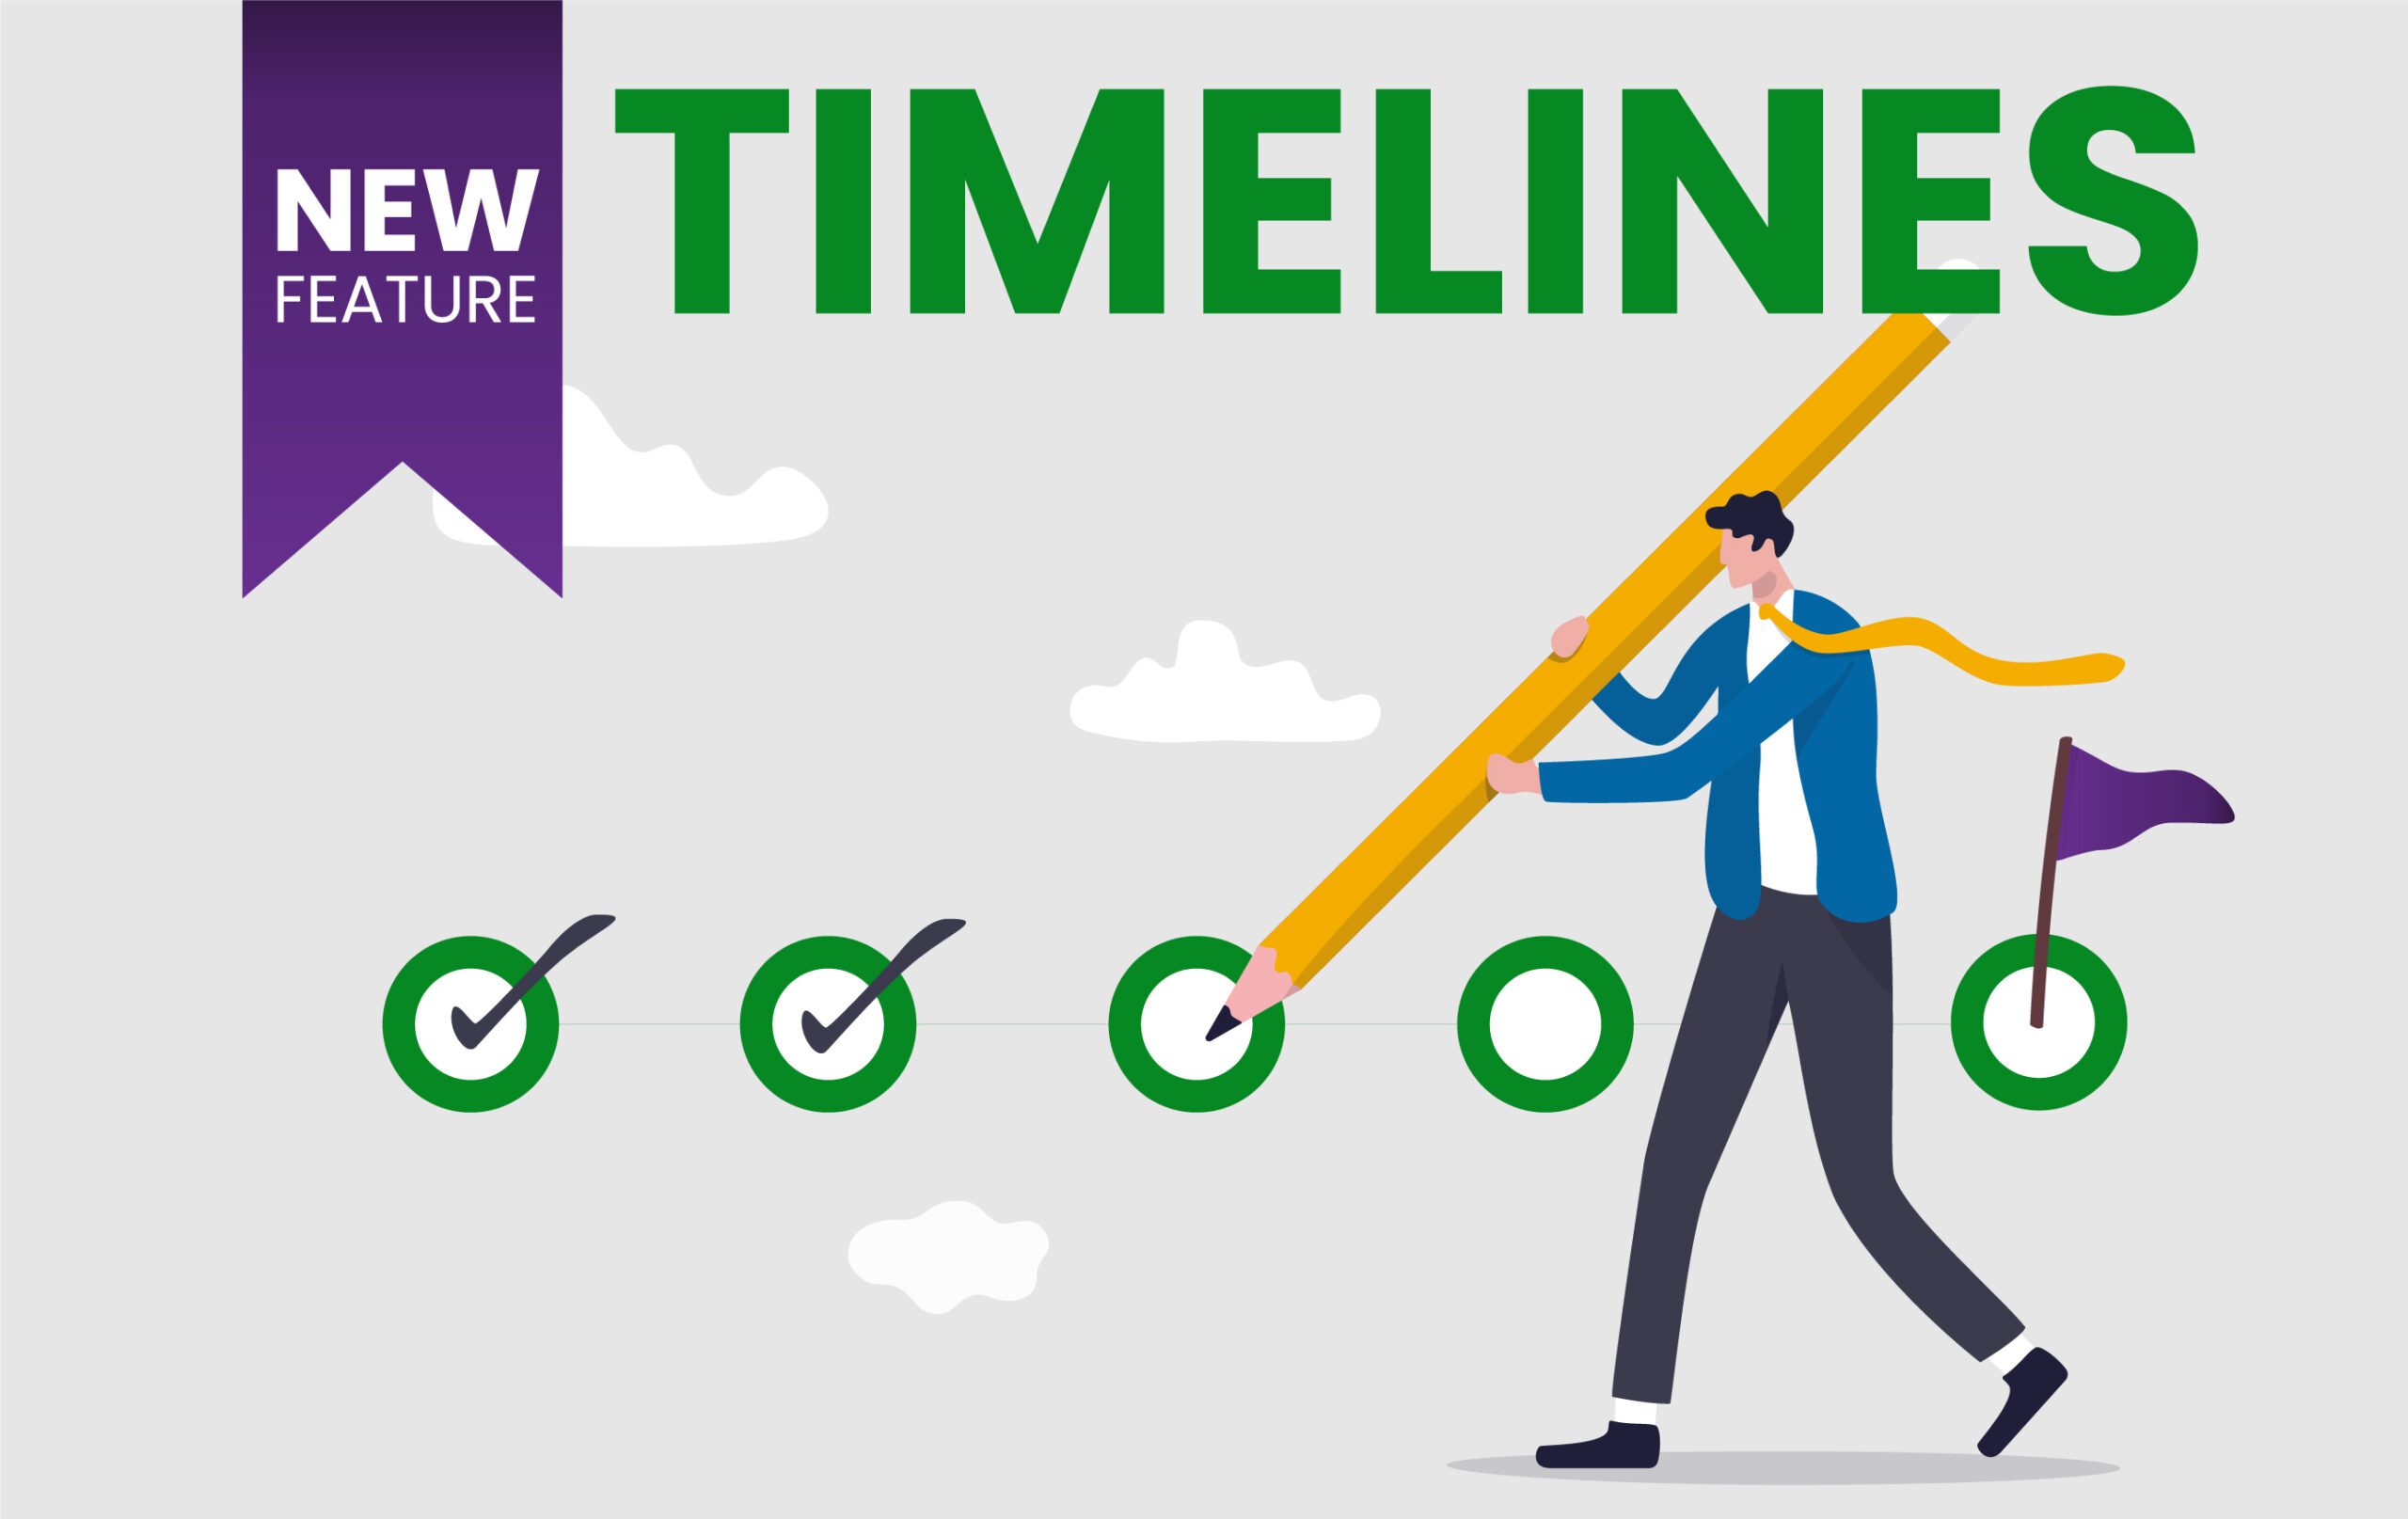 New Feature: Timelines